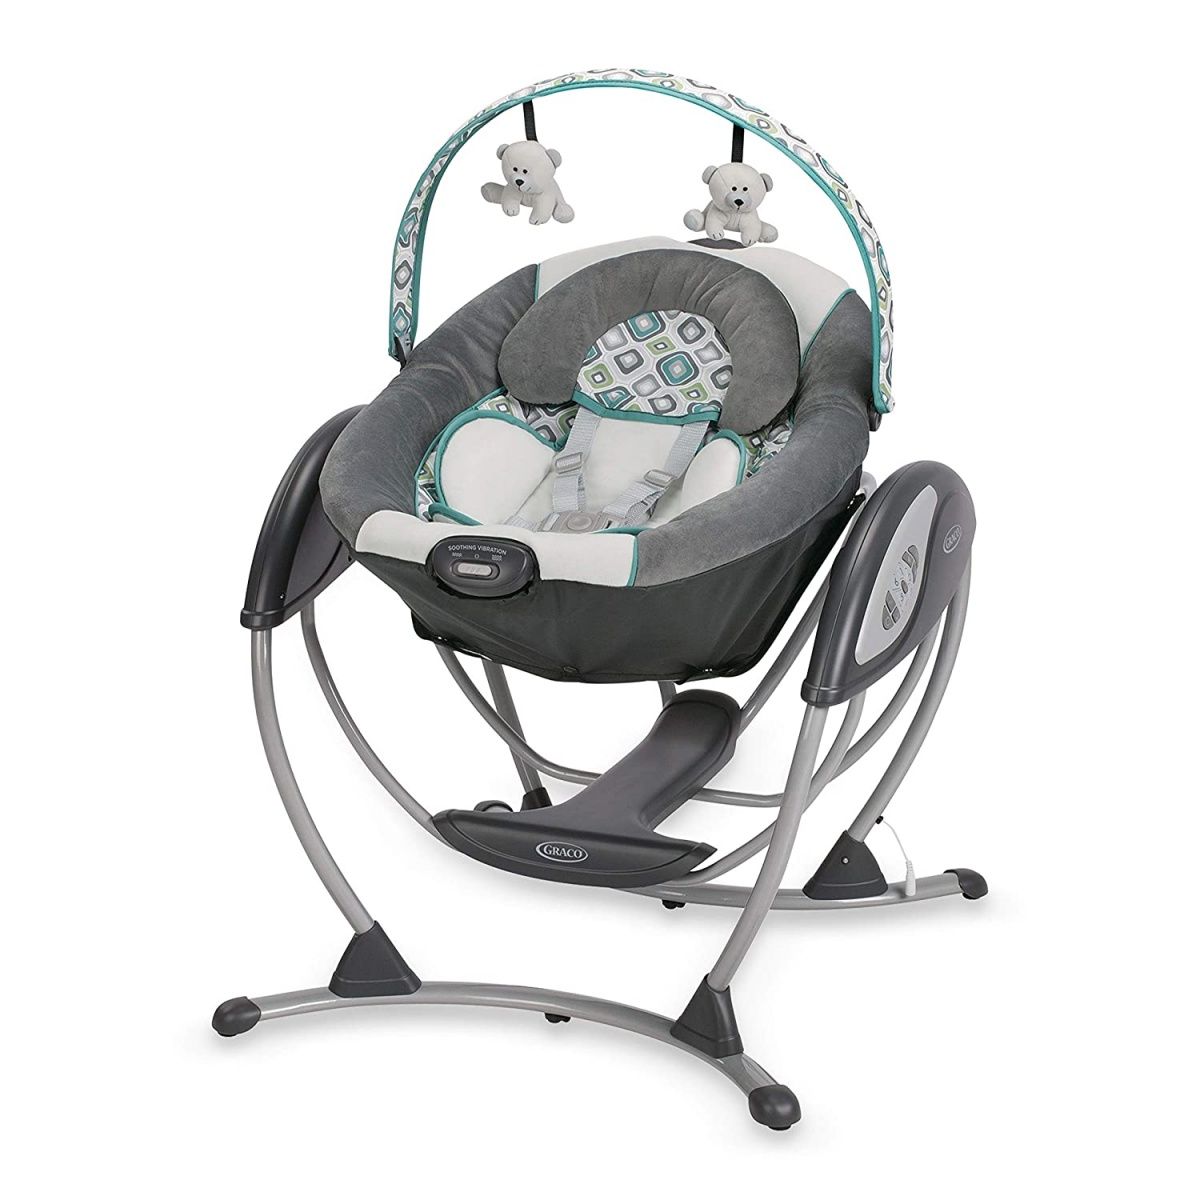 graco glider lx swing baby swing review